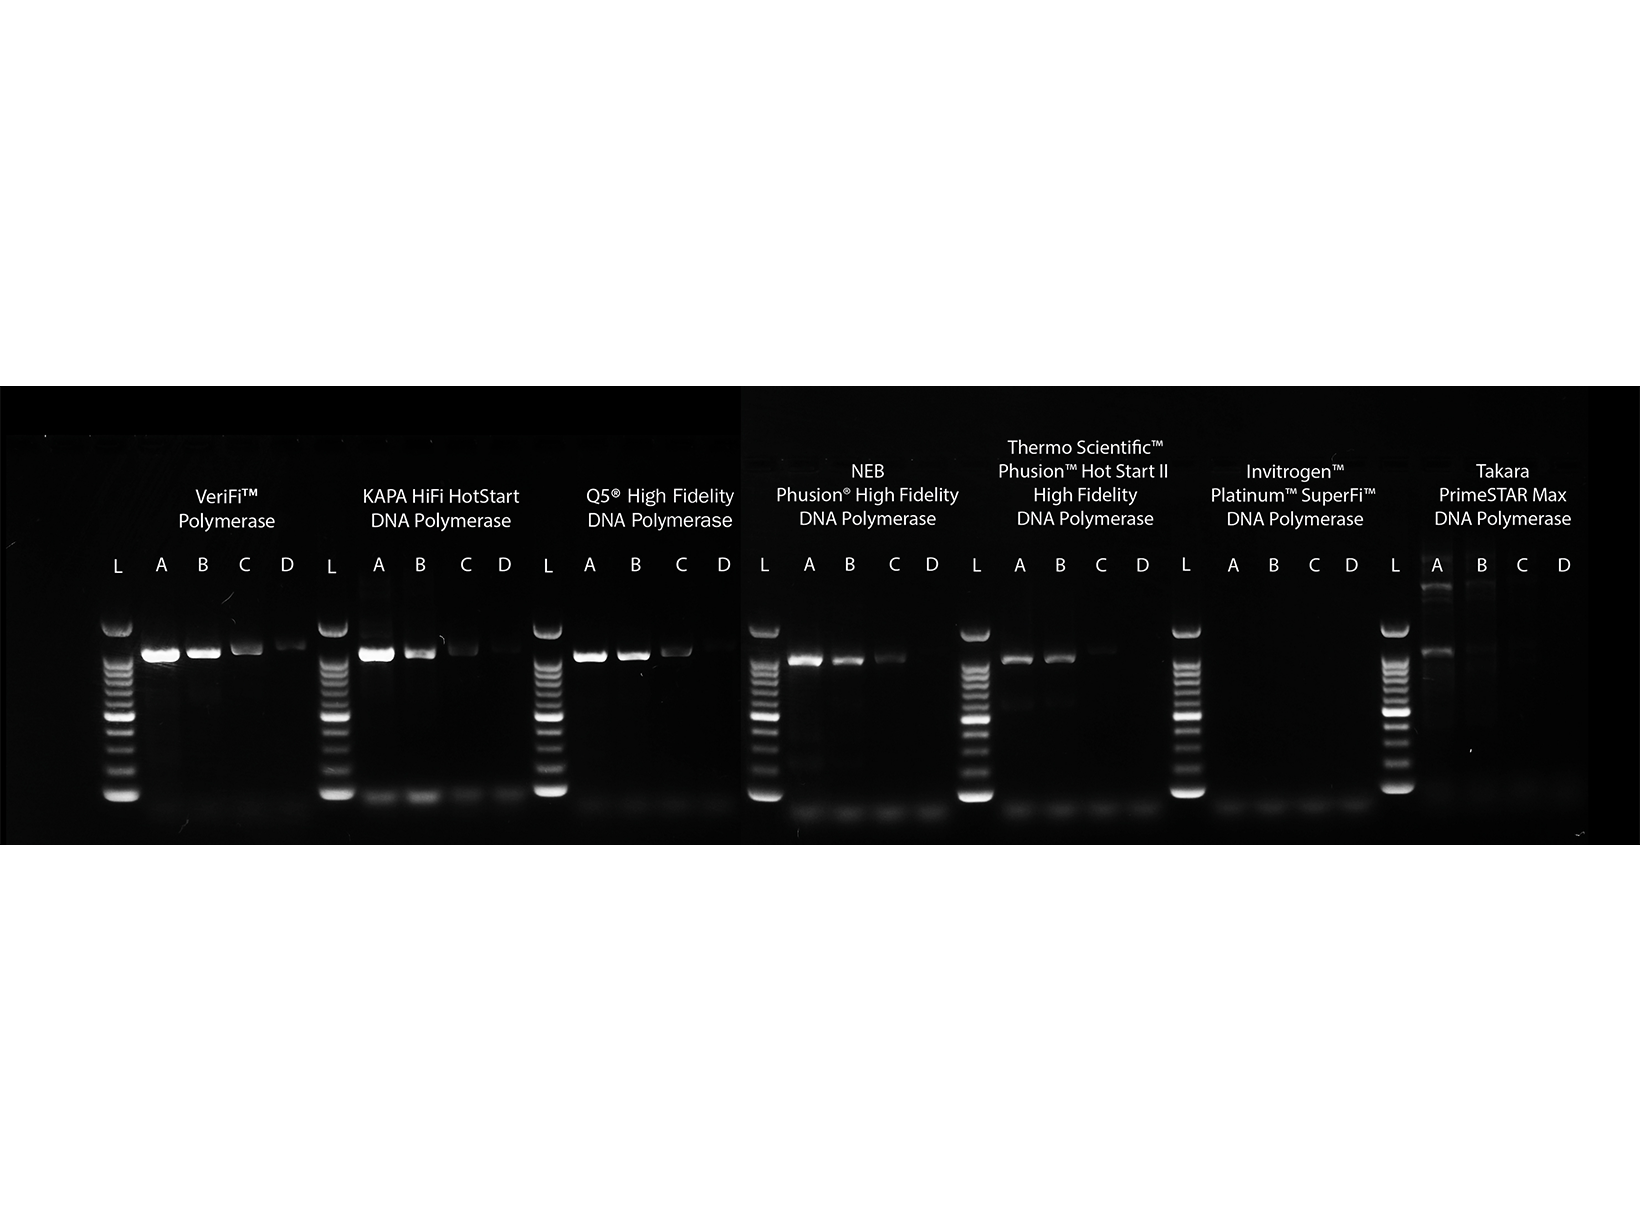 Gel image comparing the sensitivity of VeriFi™ Polymerase compared to leading competitors